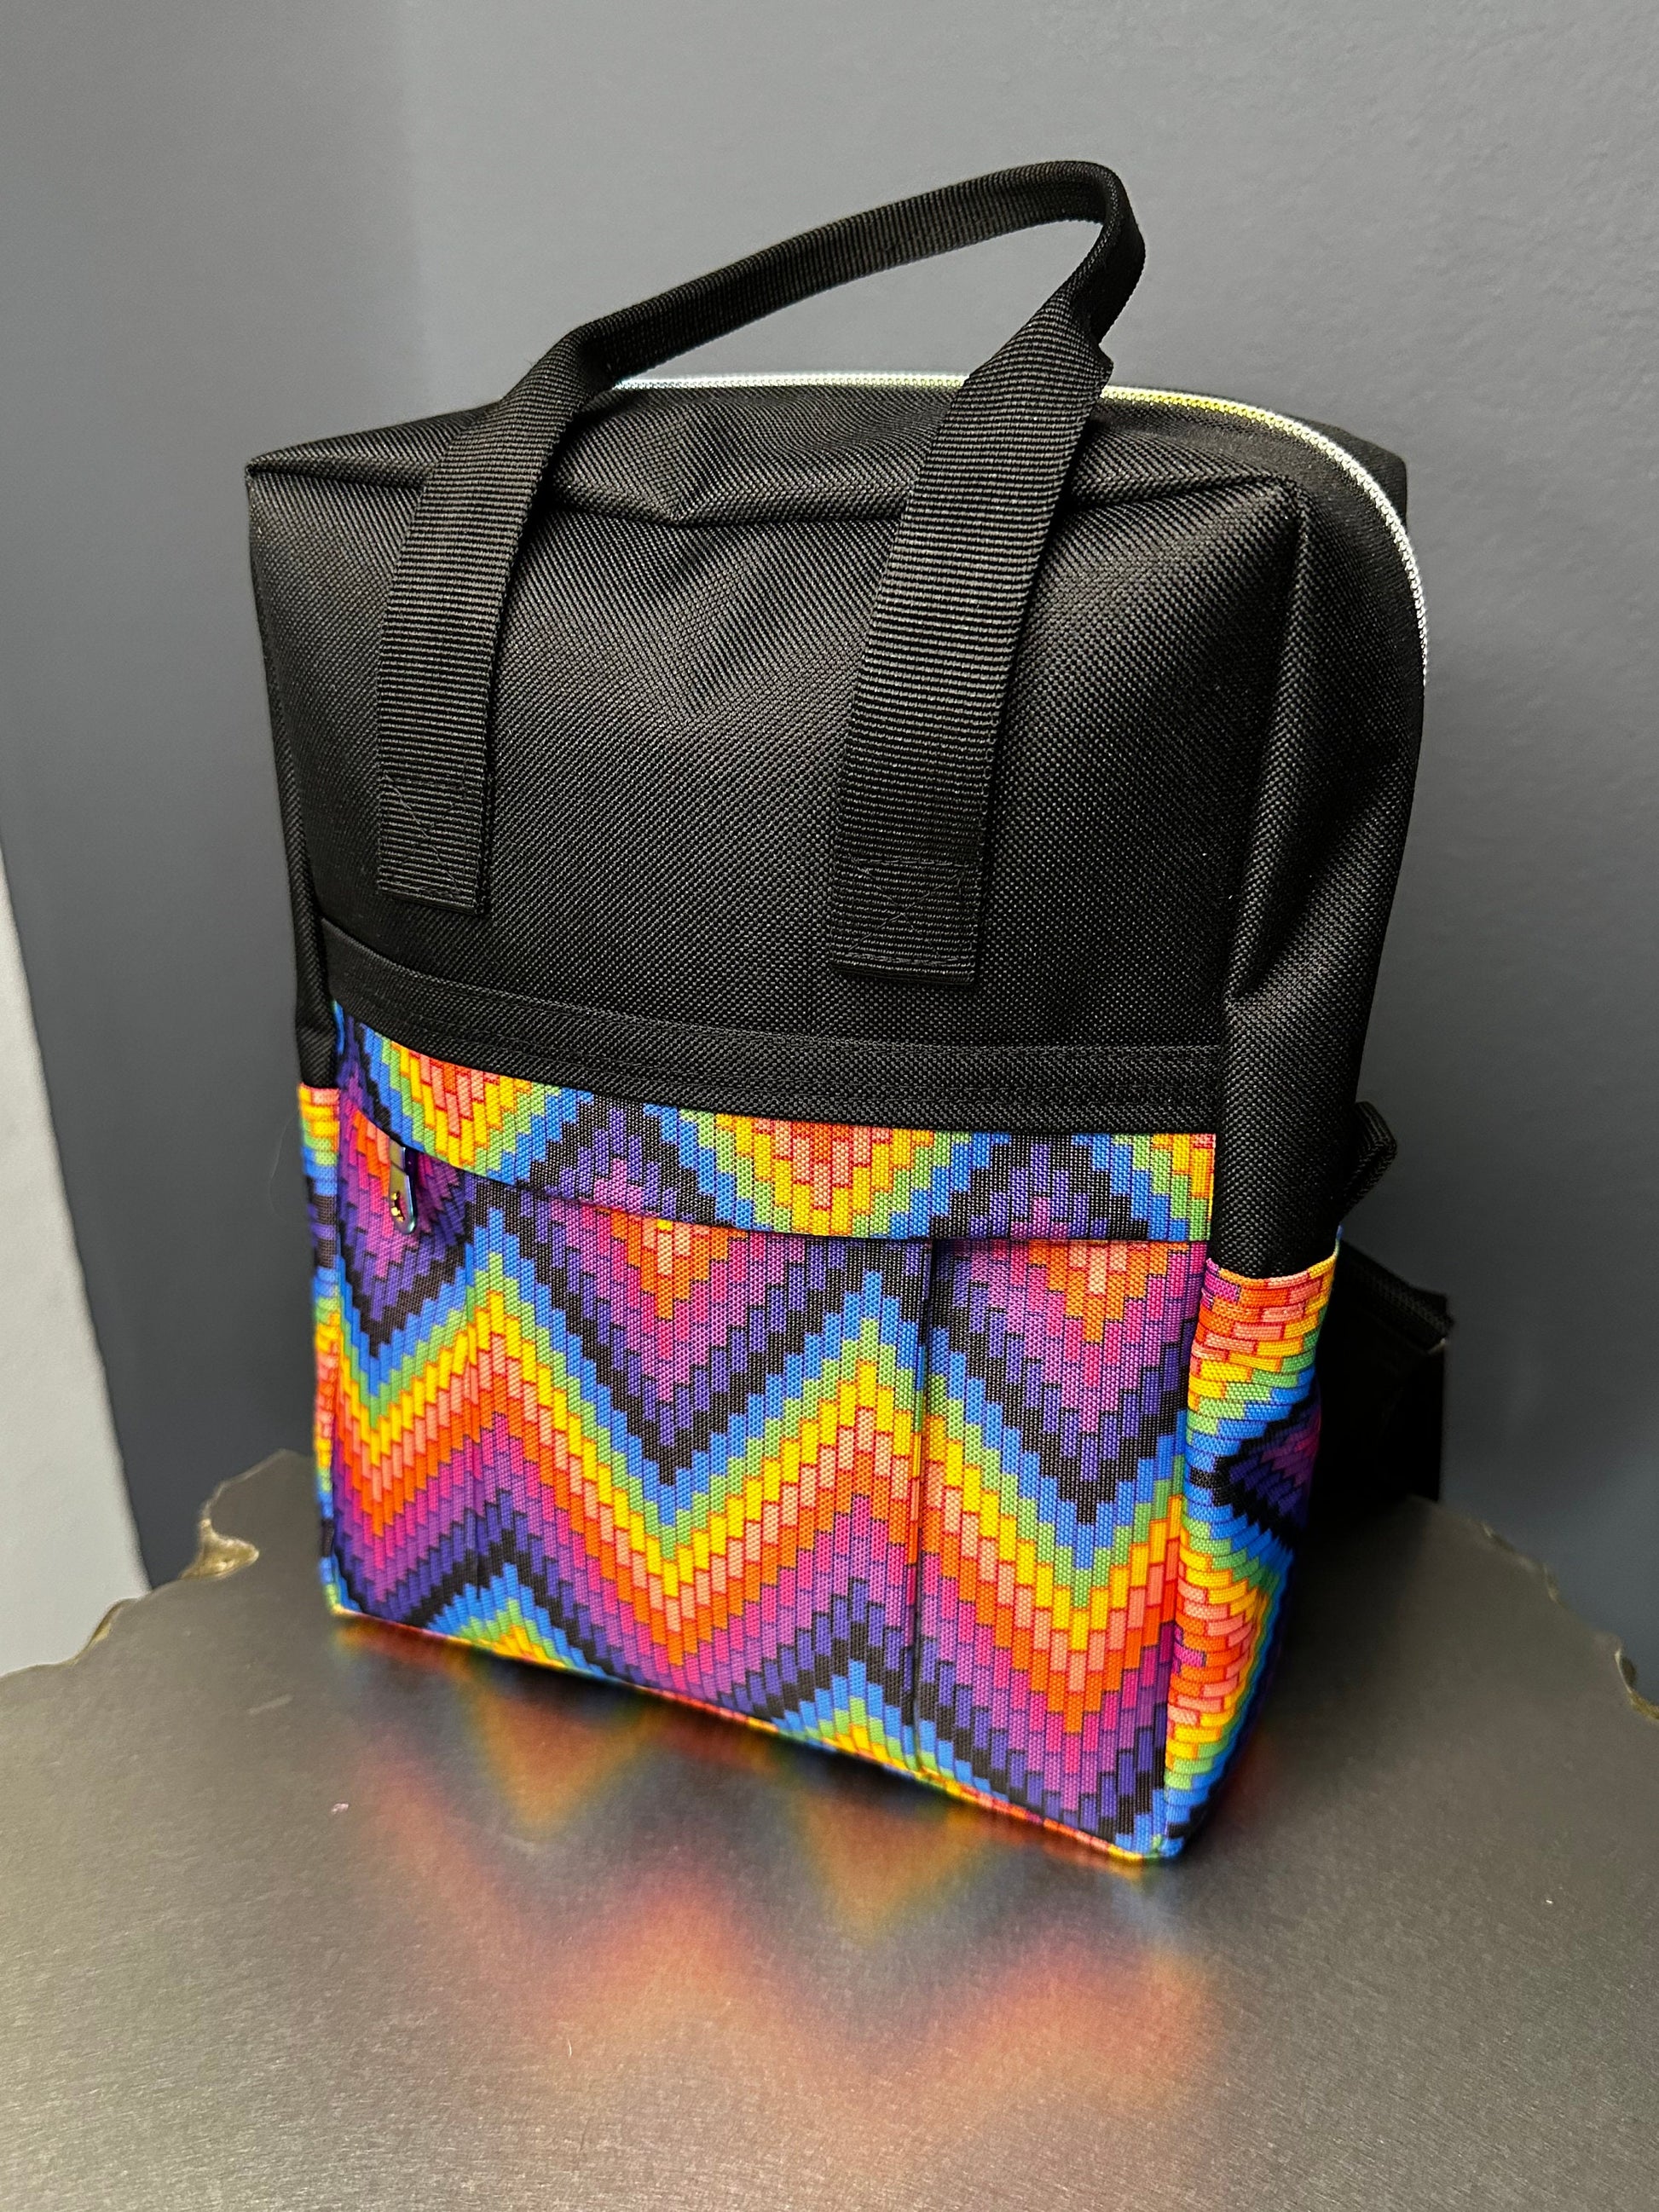 Waterproof Mini-Backpack Black with Rainbow Accents